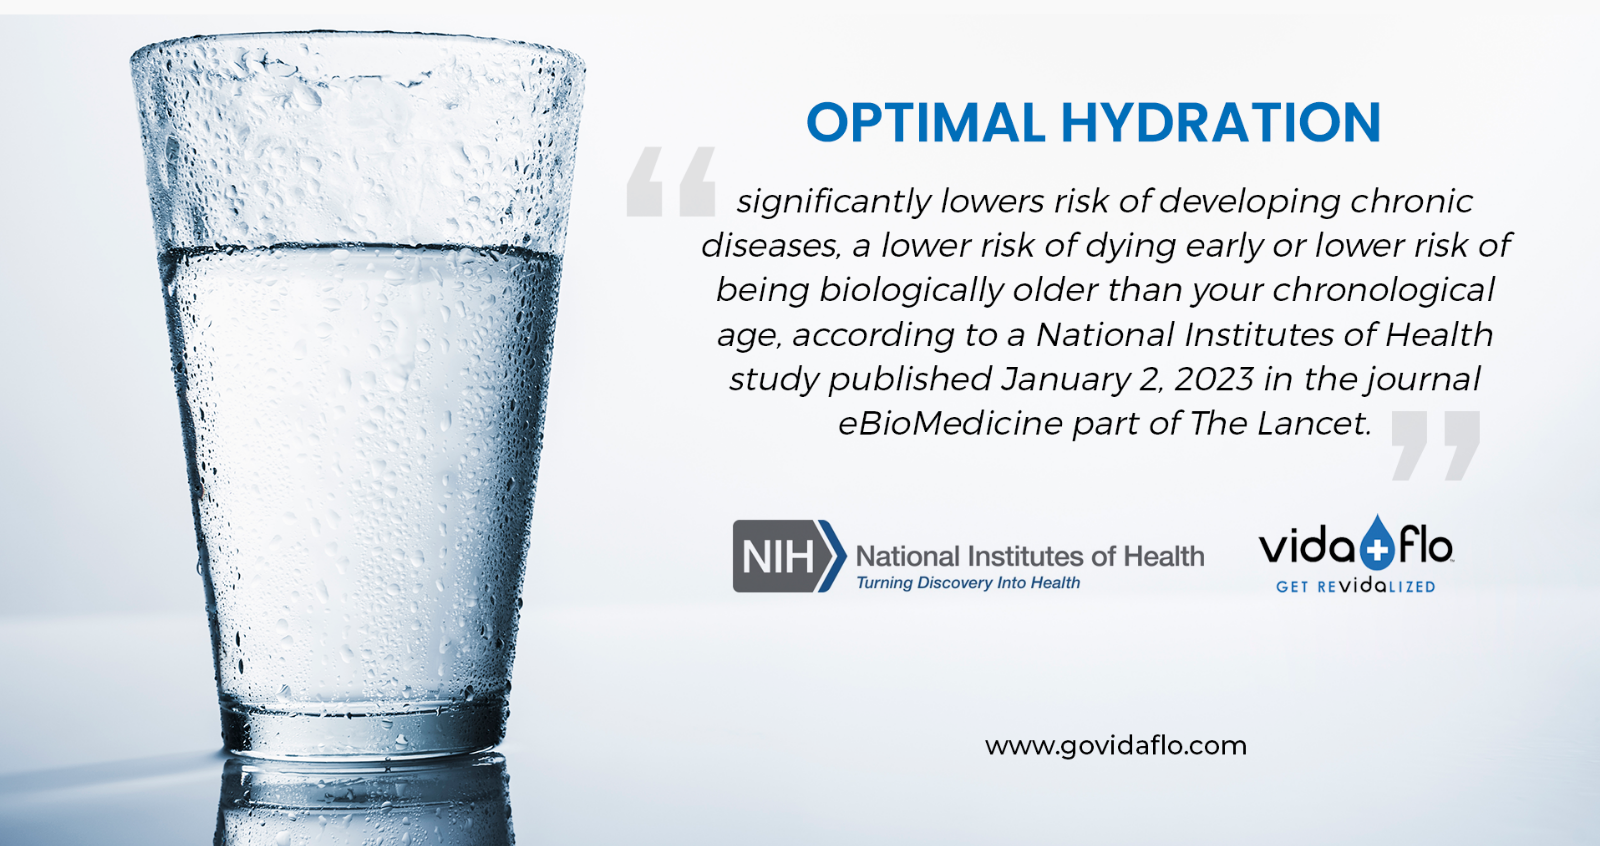 An image of a glass of water with a quote on optimal hydration in Buckhead, GA.